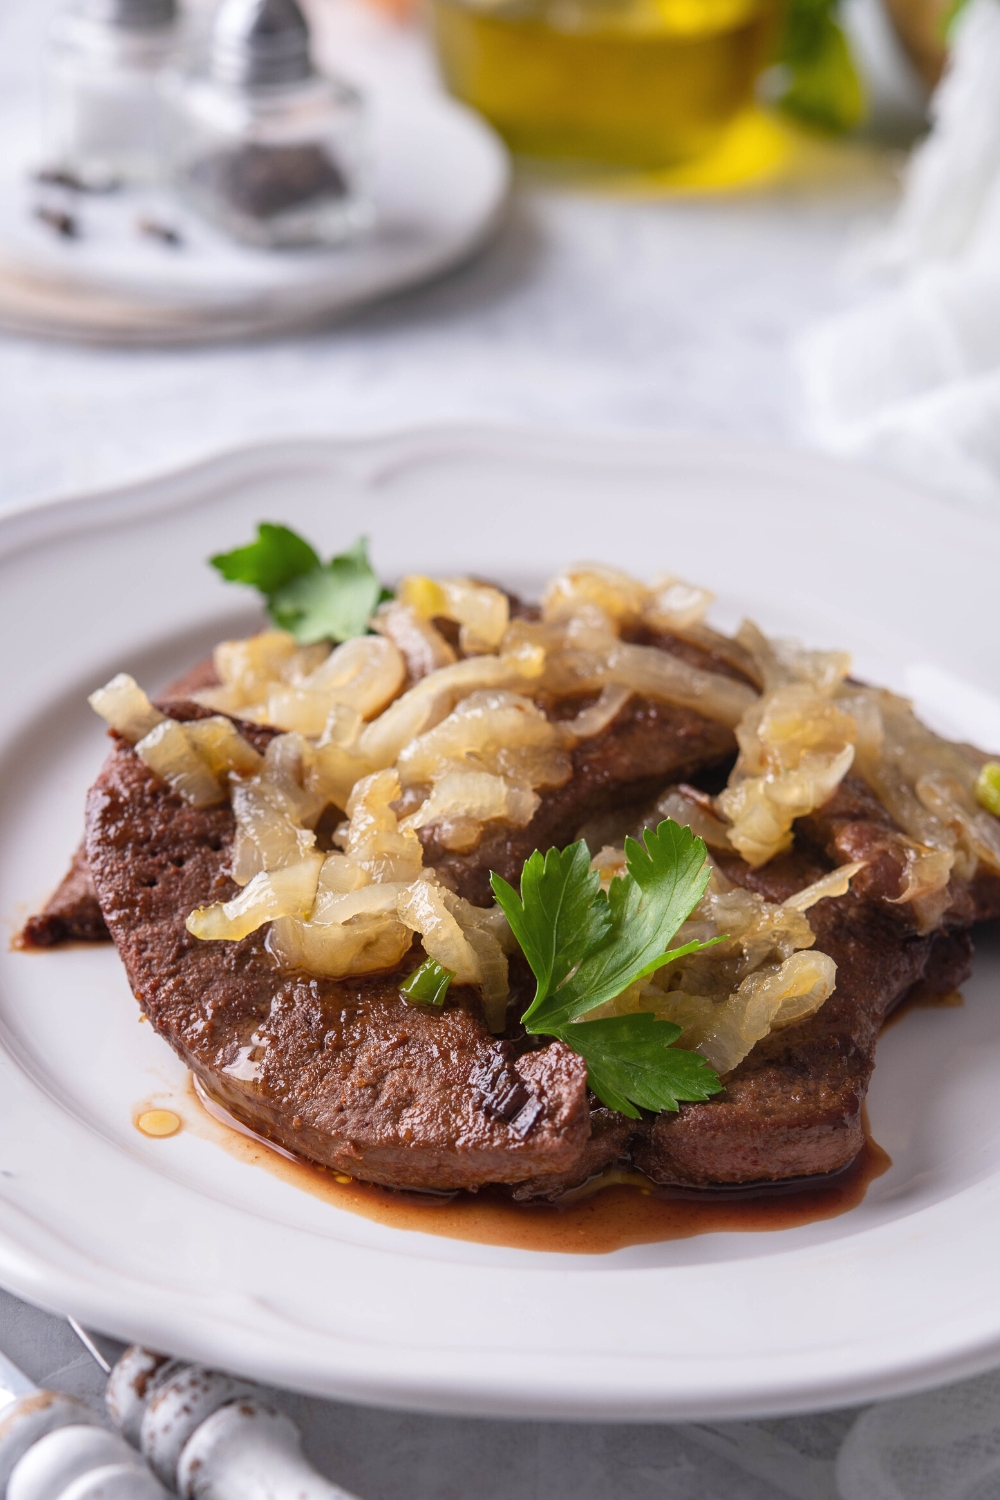 Chopped caramelized onions on top of liver on a plate.